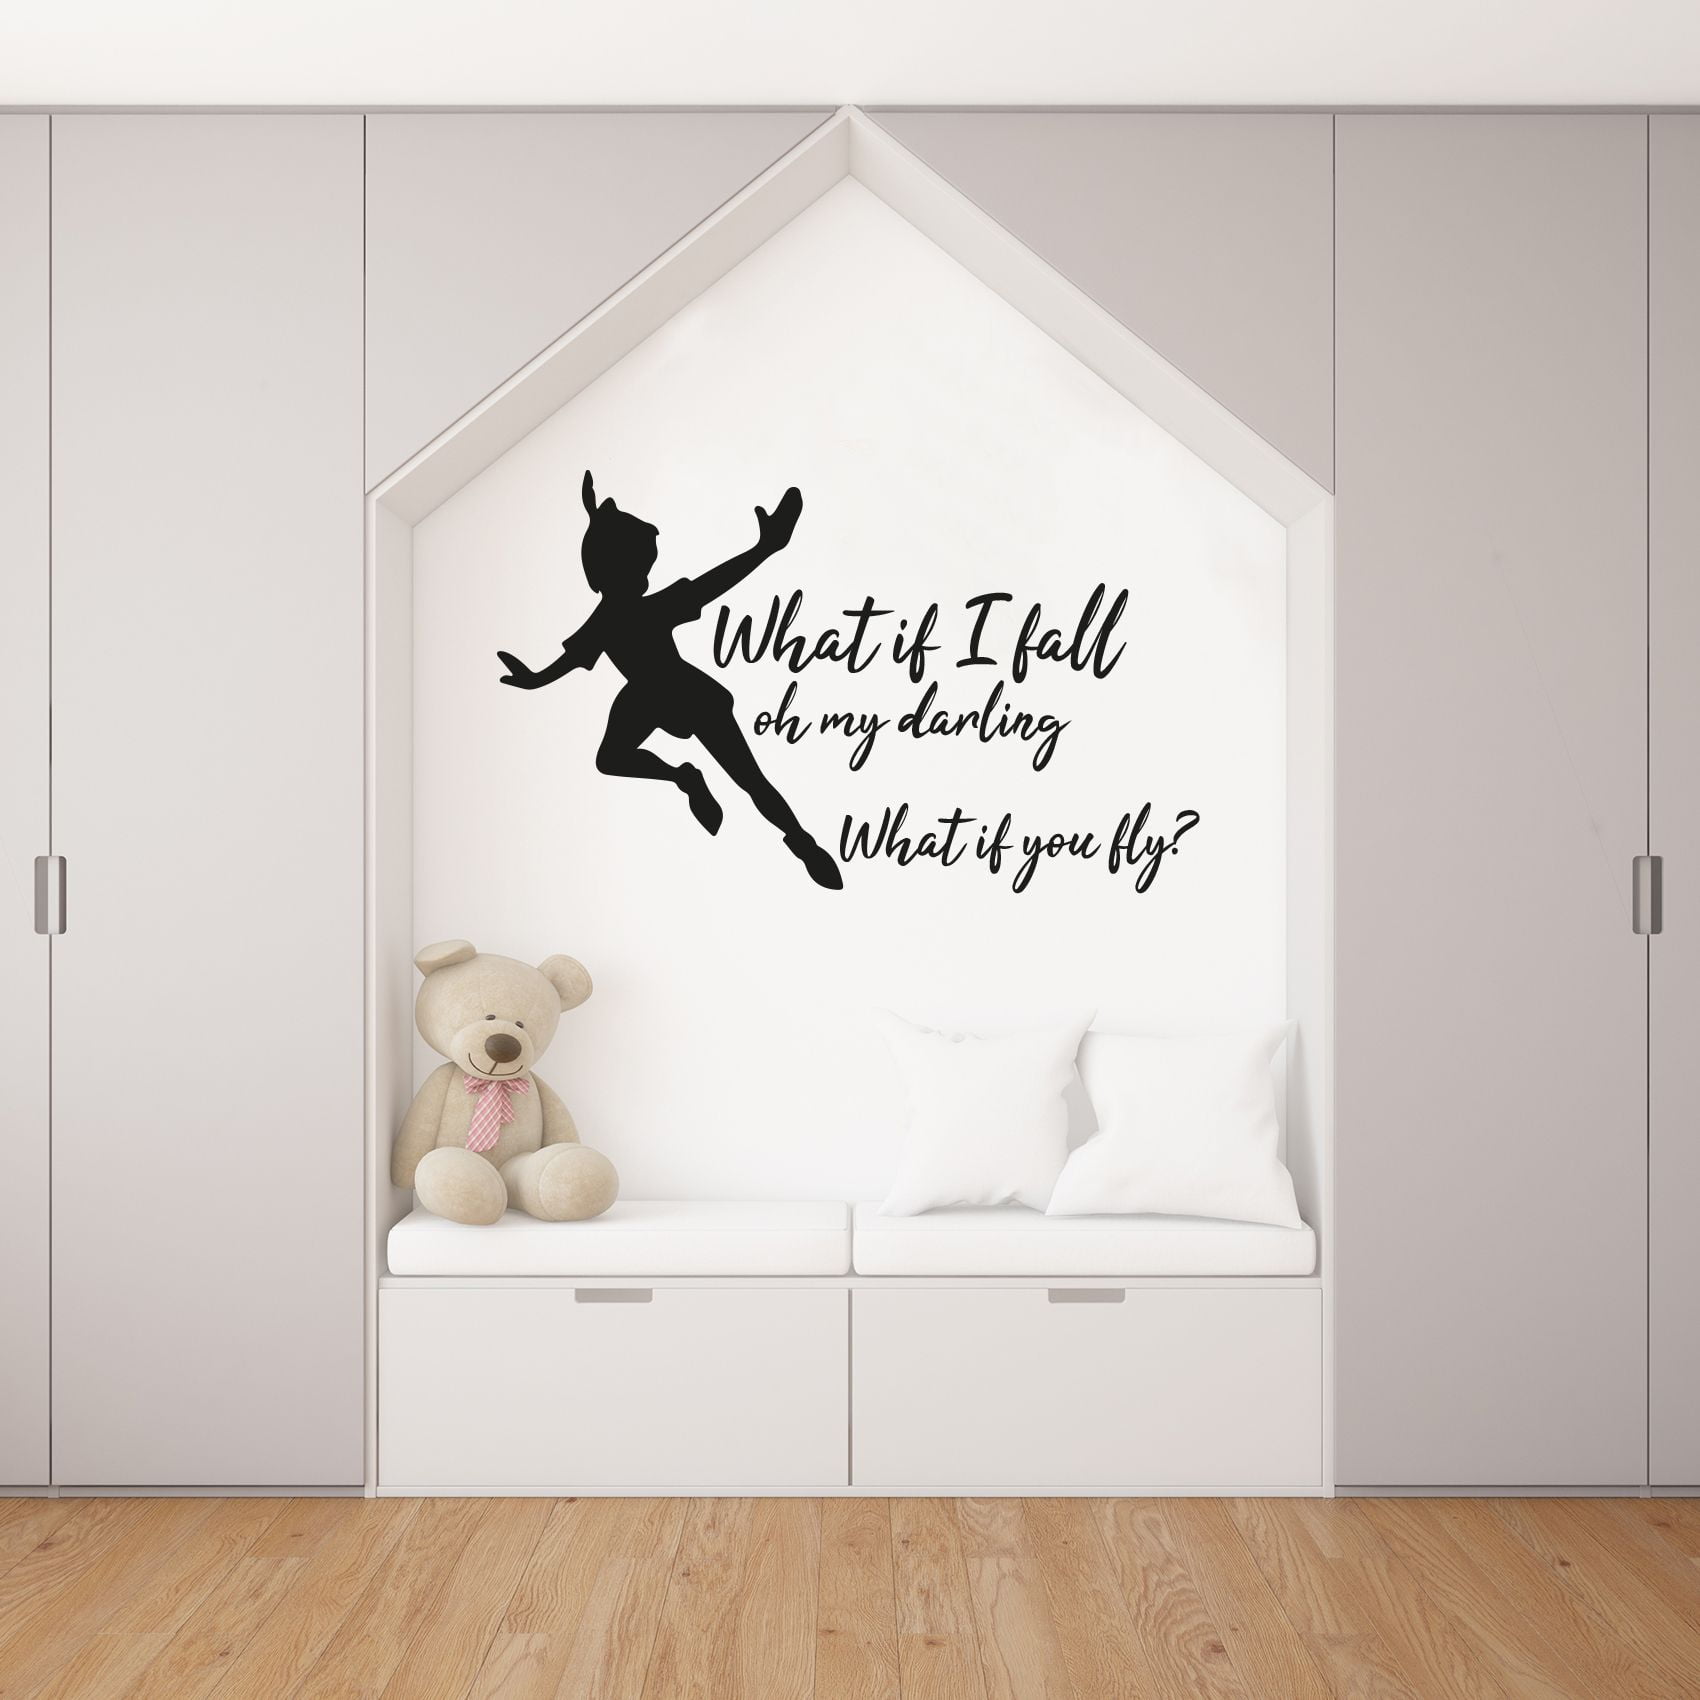 DREAMS SO COME WITH ME FLY STYLE OF PETER PAN  WALL ART DECAL VINYL STICKER